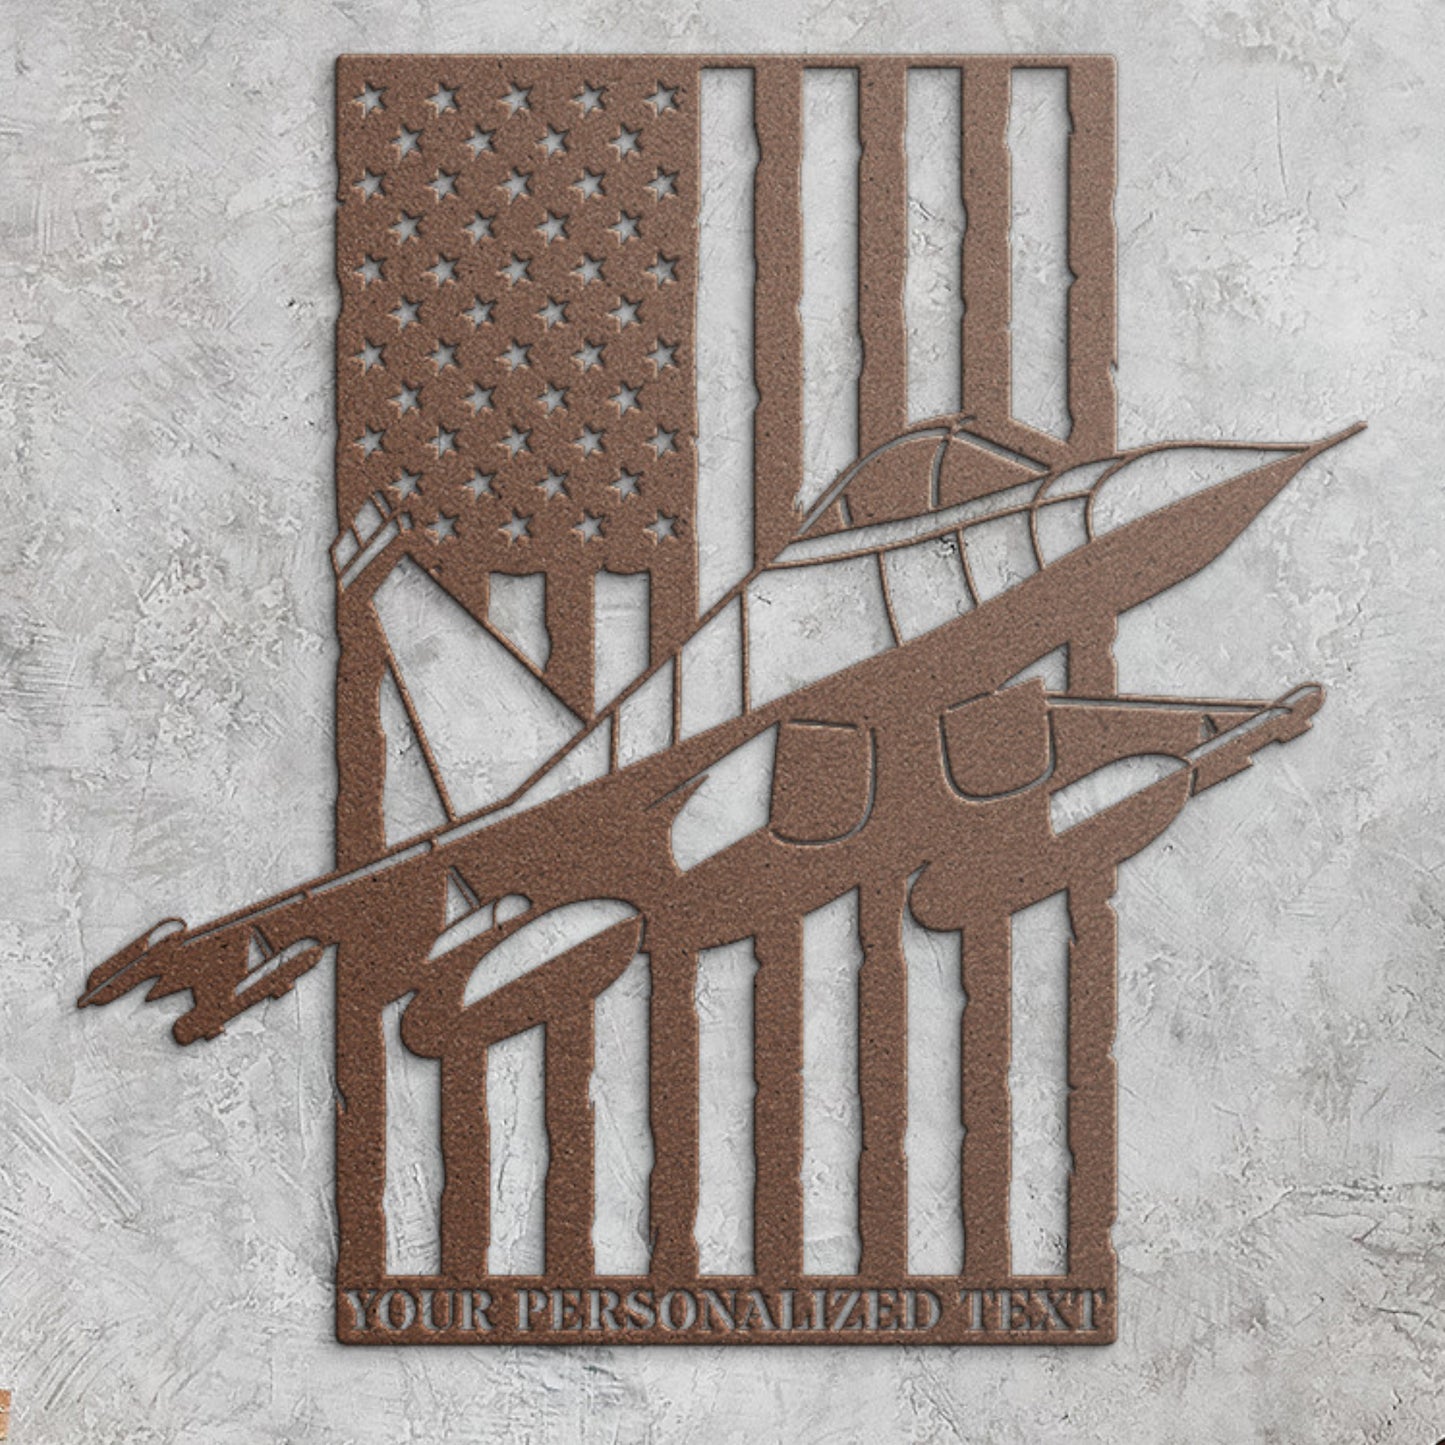 Personalized US Jet Fighter Metal Sign. Custom American Fighter Pilot Wall Decor Gift. Airplane Wall Hanging. Patriotic USA Combat Pilot 